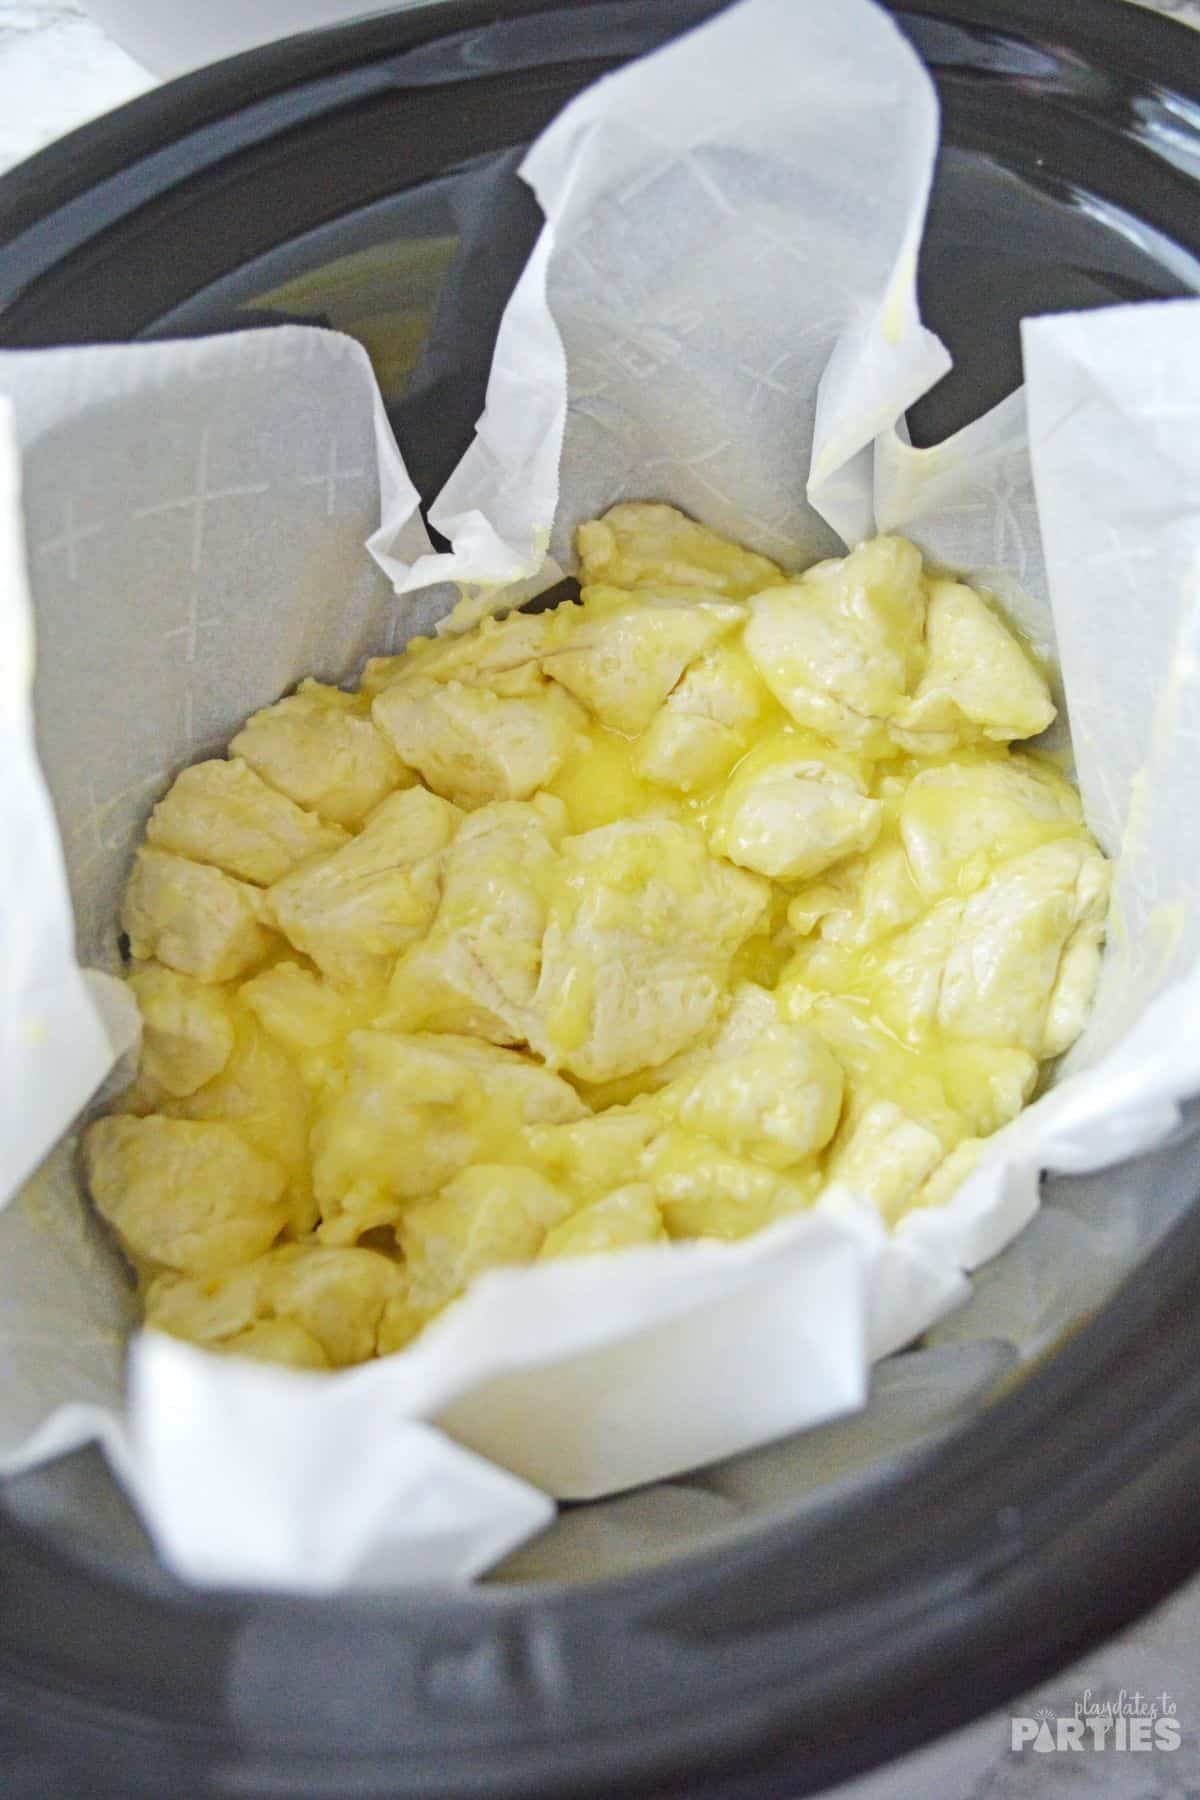 Buttery biscuit pieces in a crock pot.